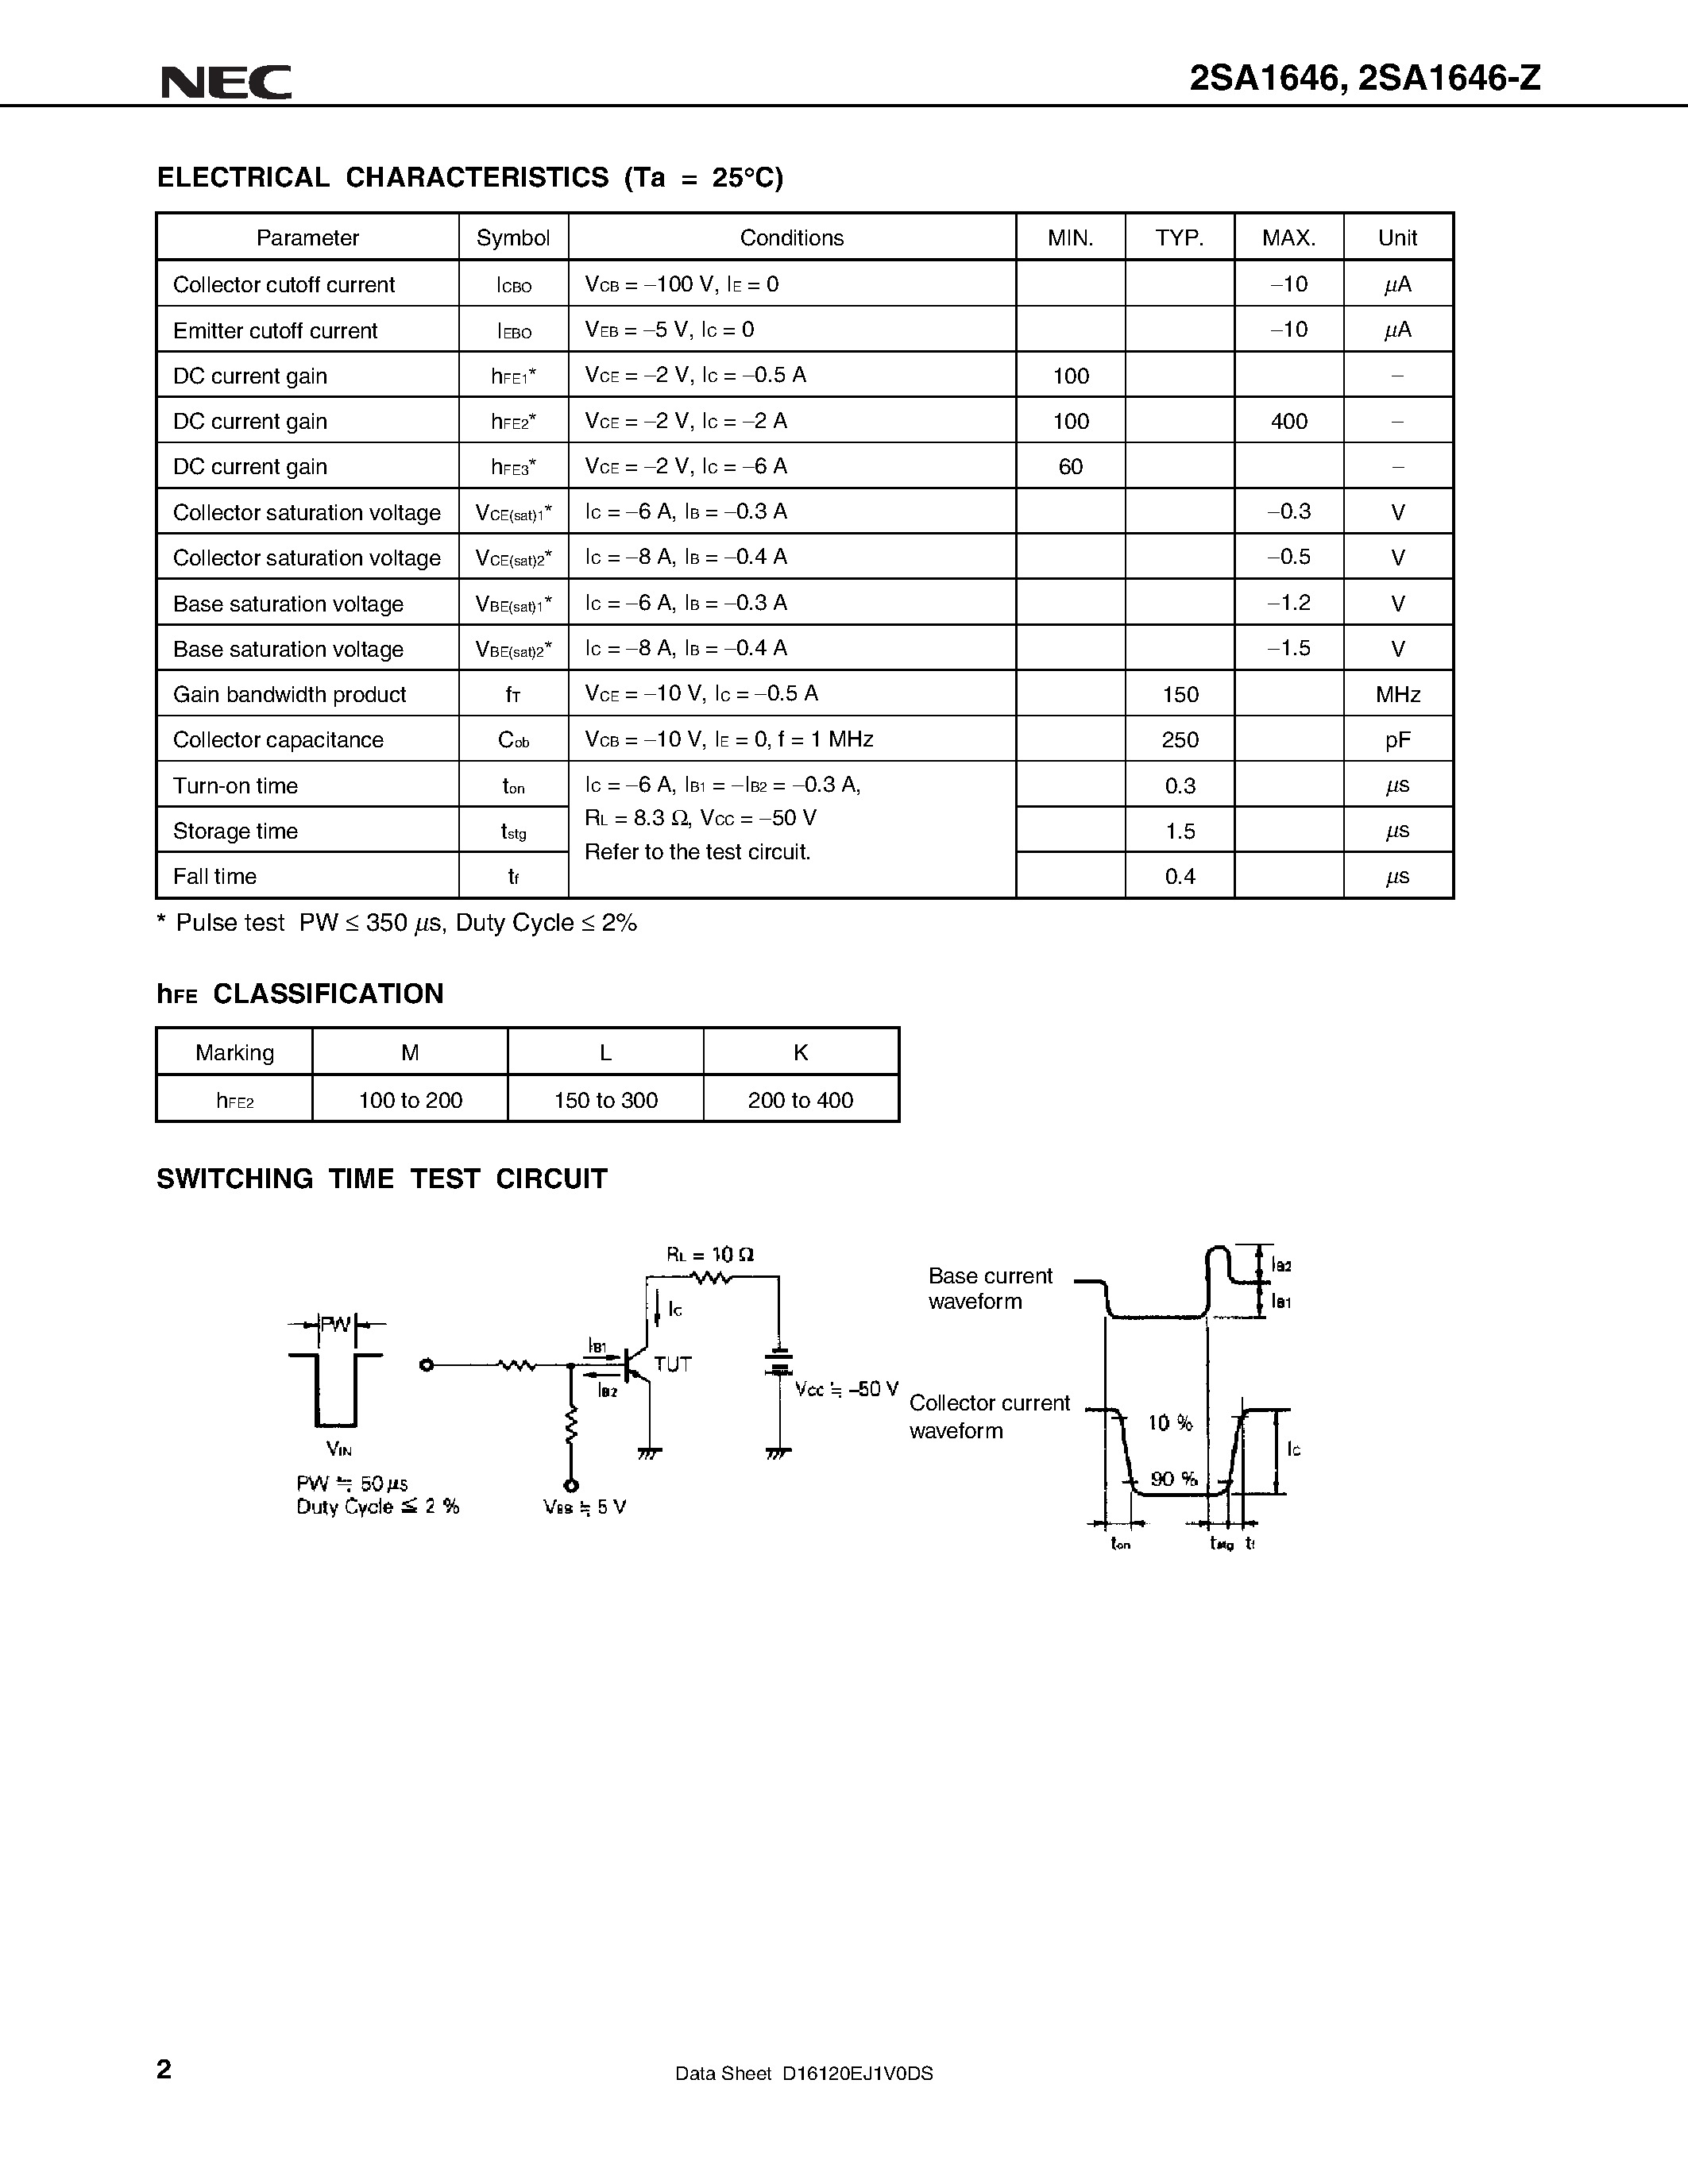 Datasheet 2SA1646 - PNP SILICON EPITAXIAL TRANSISTOR FOR HIGH-SPEED SWITCHING page 2